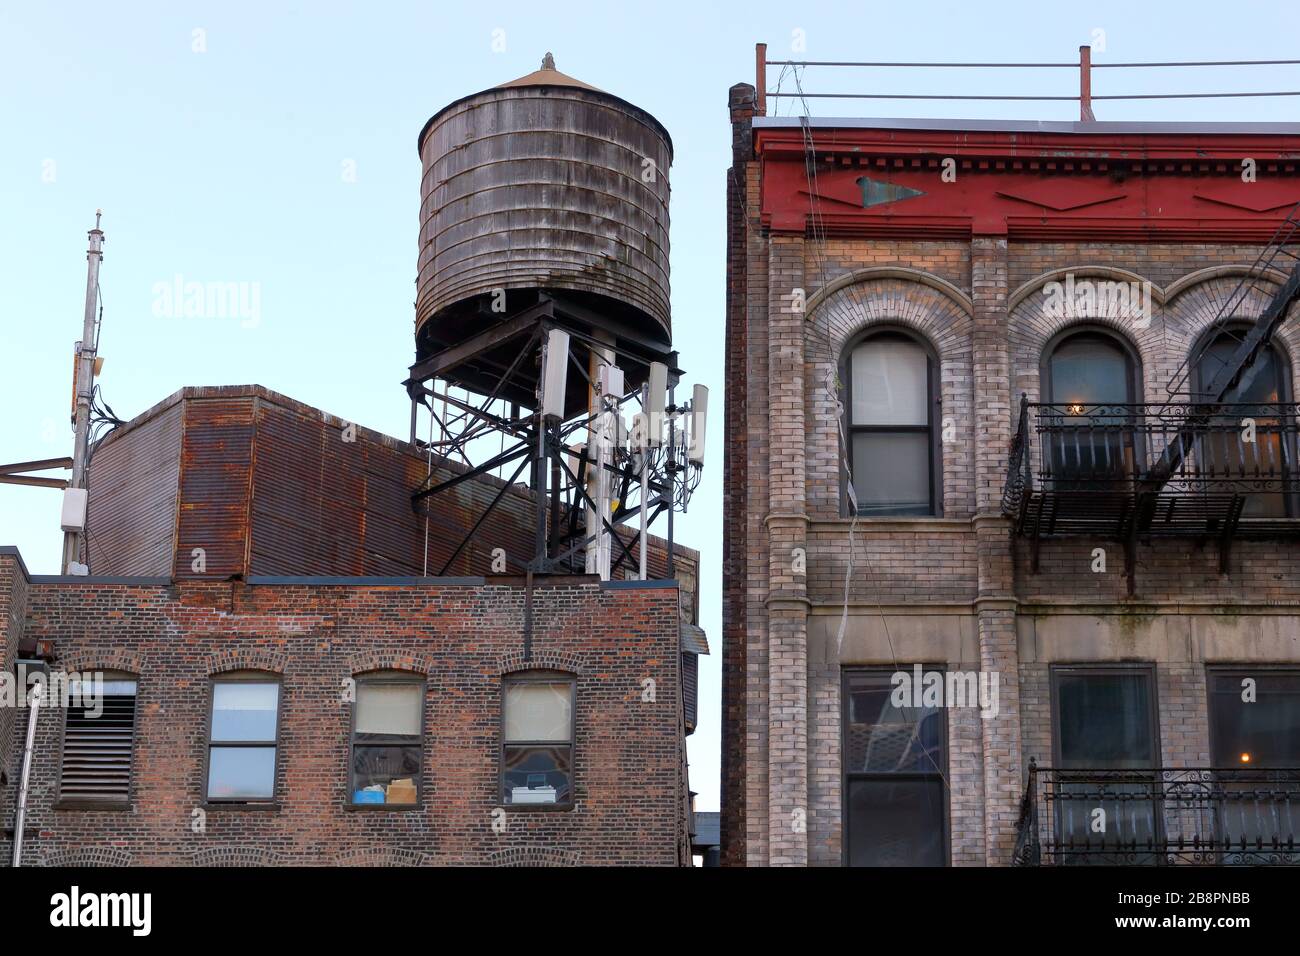 A wooden water tank on the roof of an industrial loft building next door to a tenement building in New York City Stock Photo